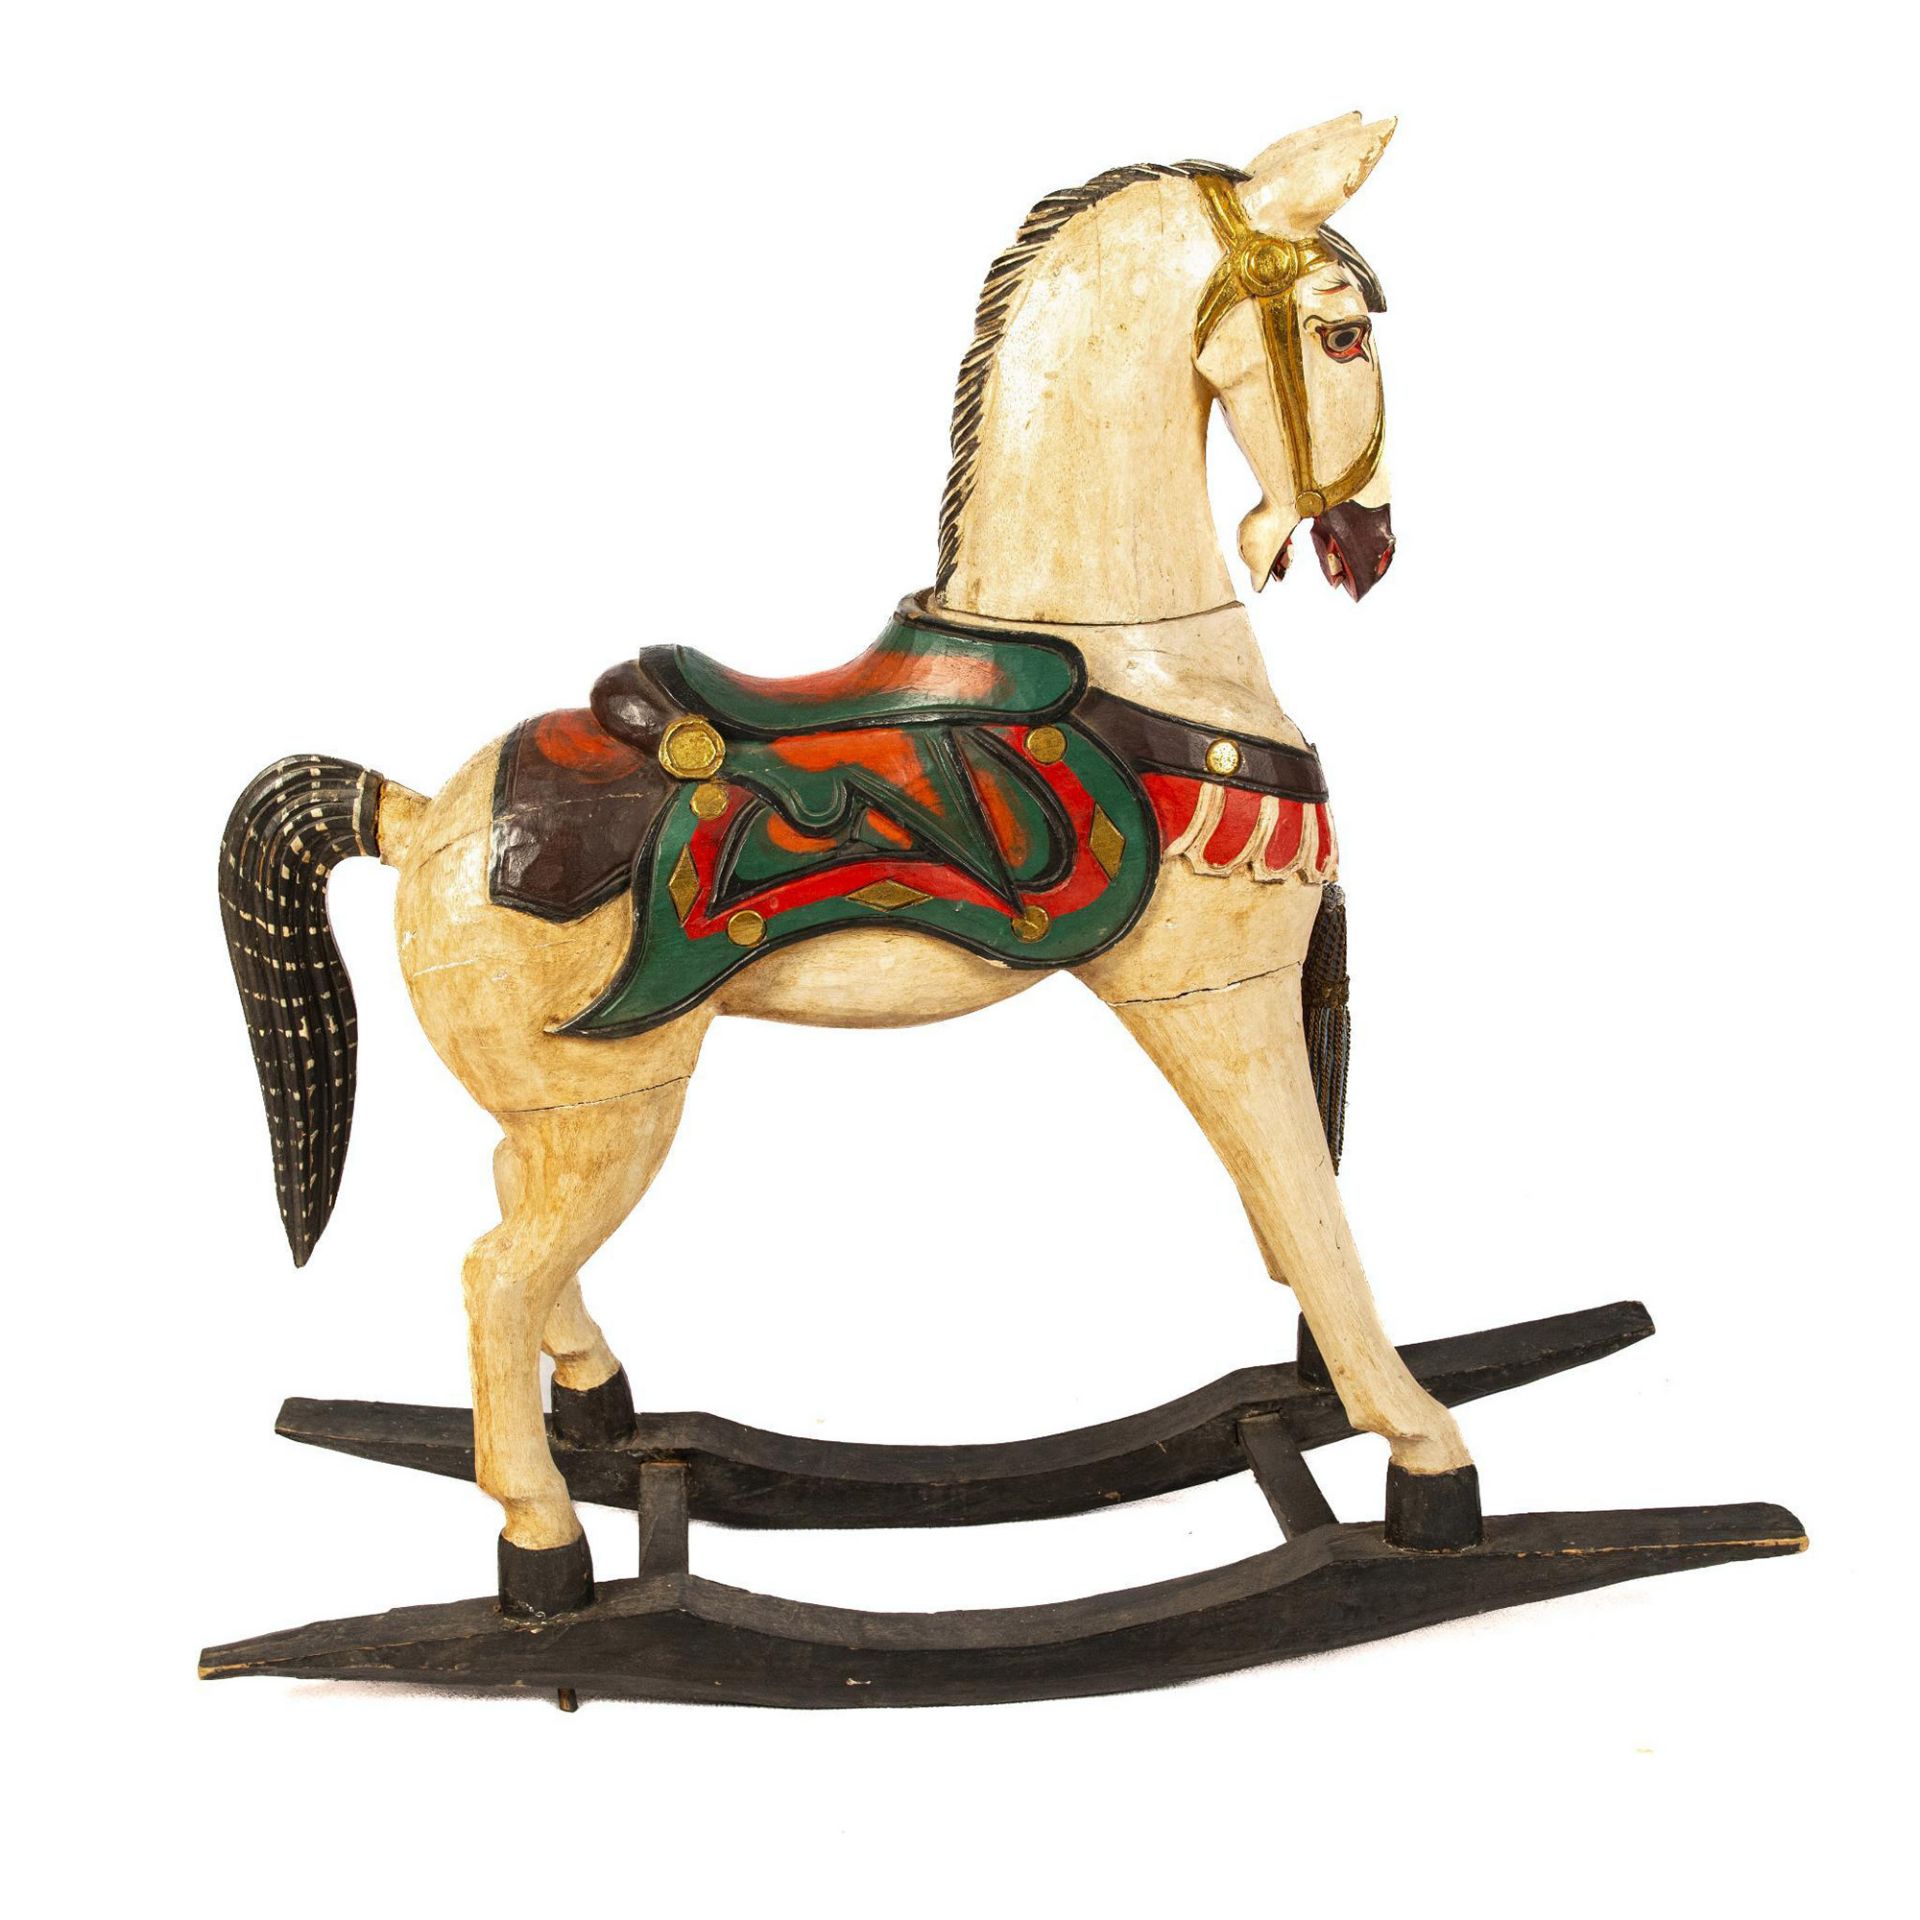 Tall Painted Wood Rocking Horse Decoration - Image 3 of 5